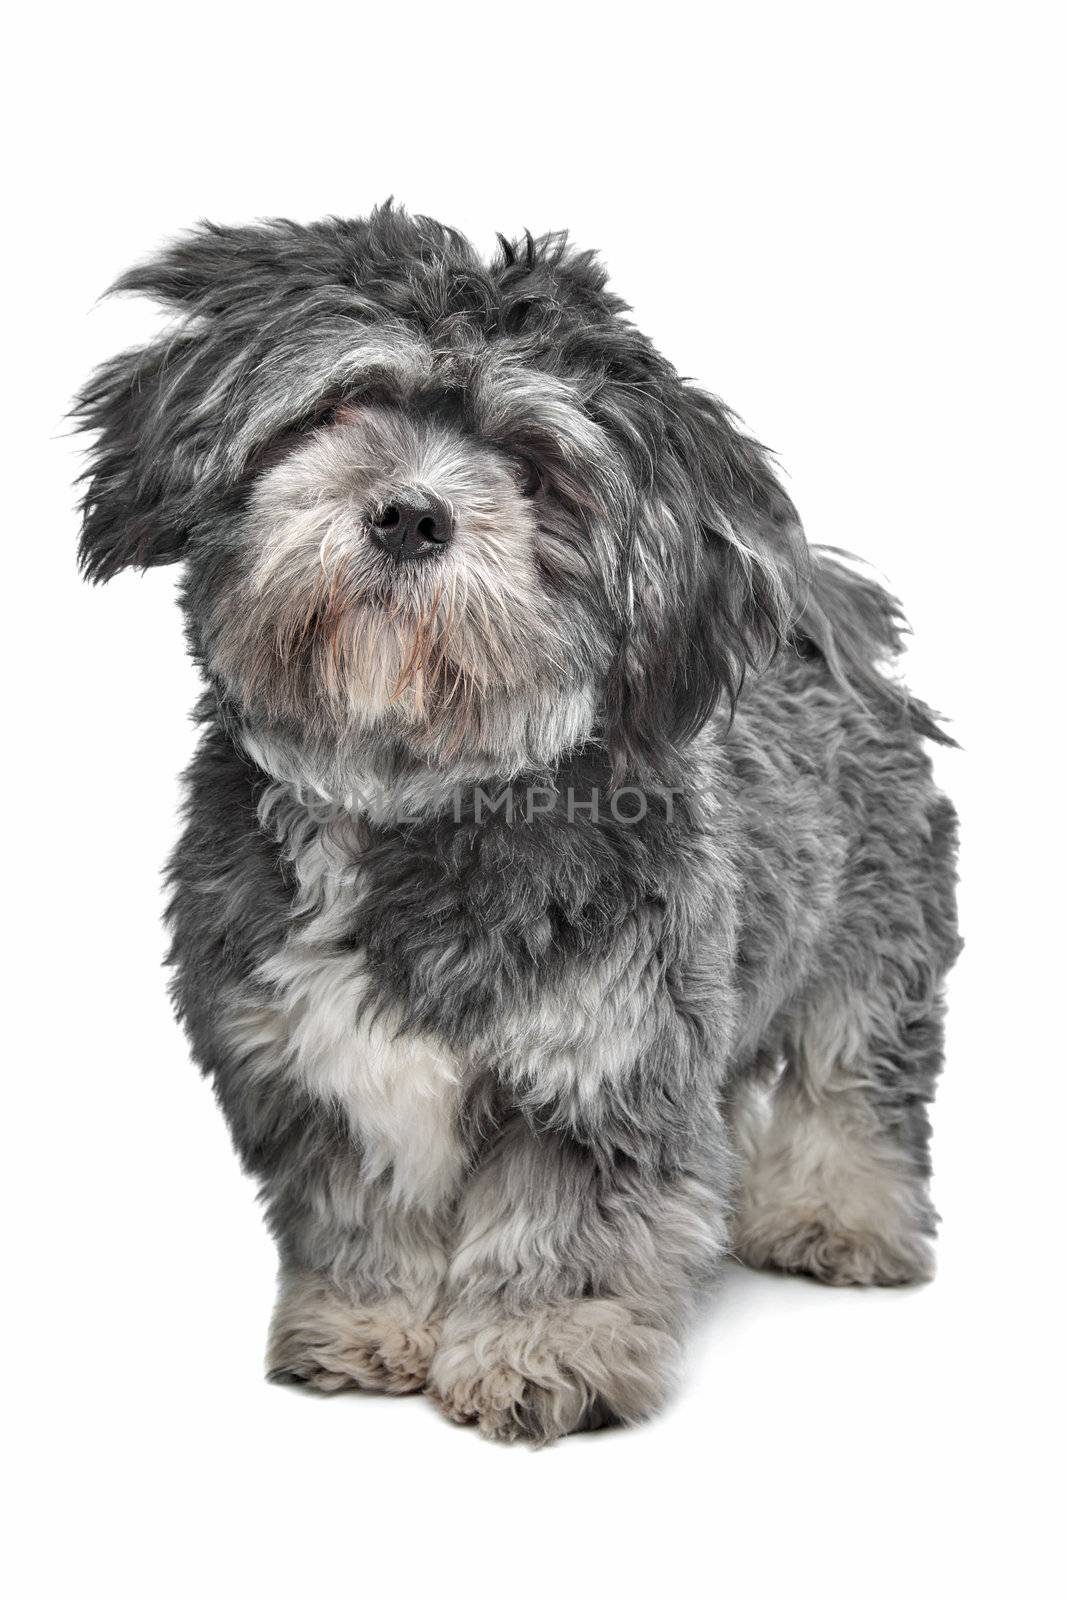 Lhasa Apso standing in front of a white background